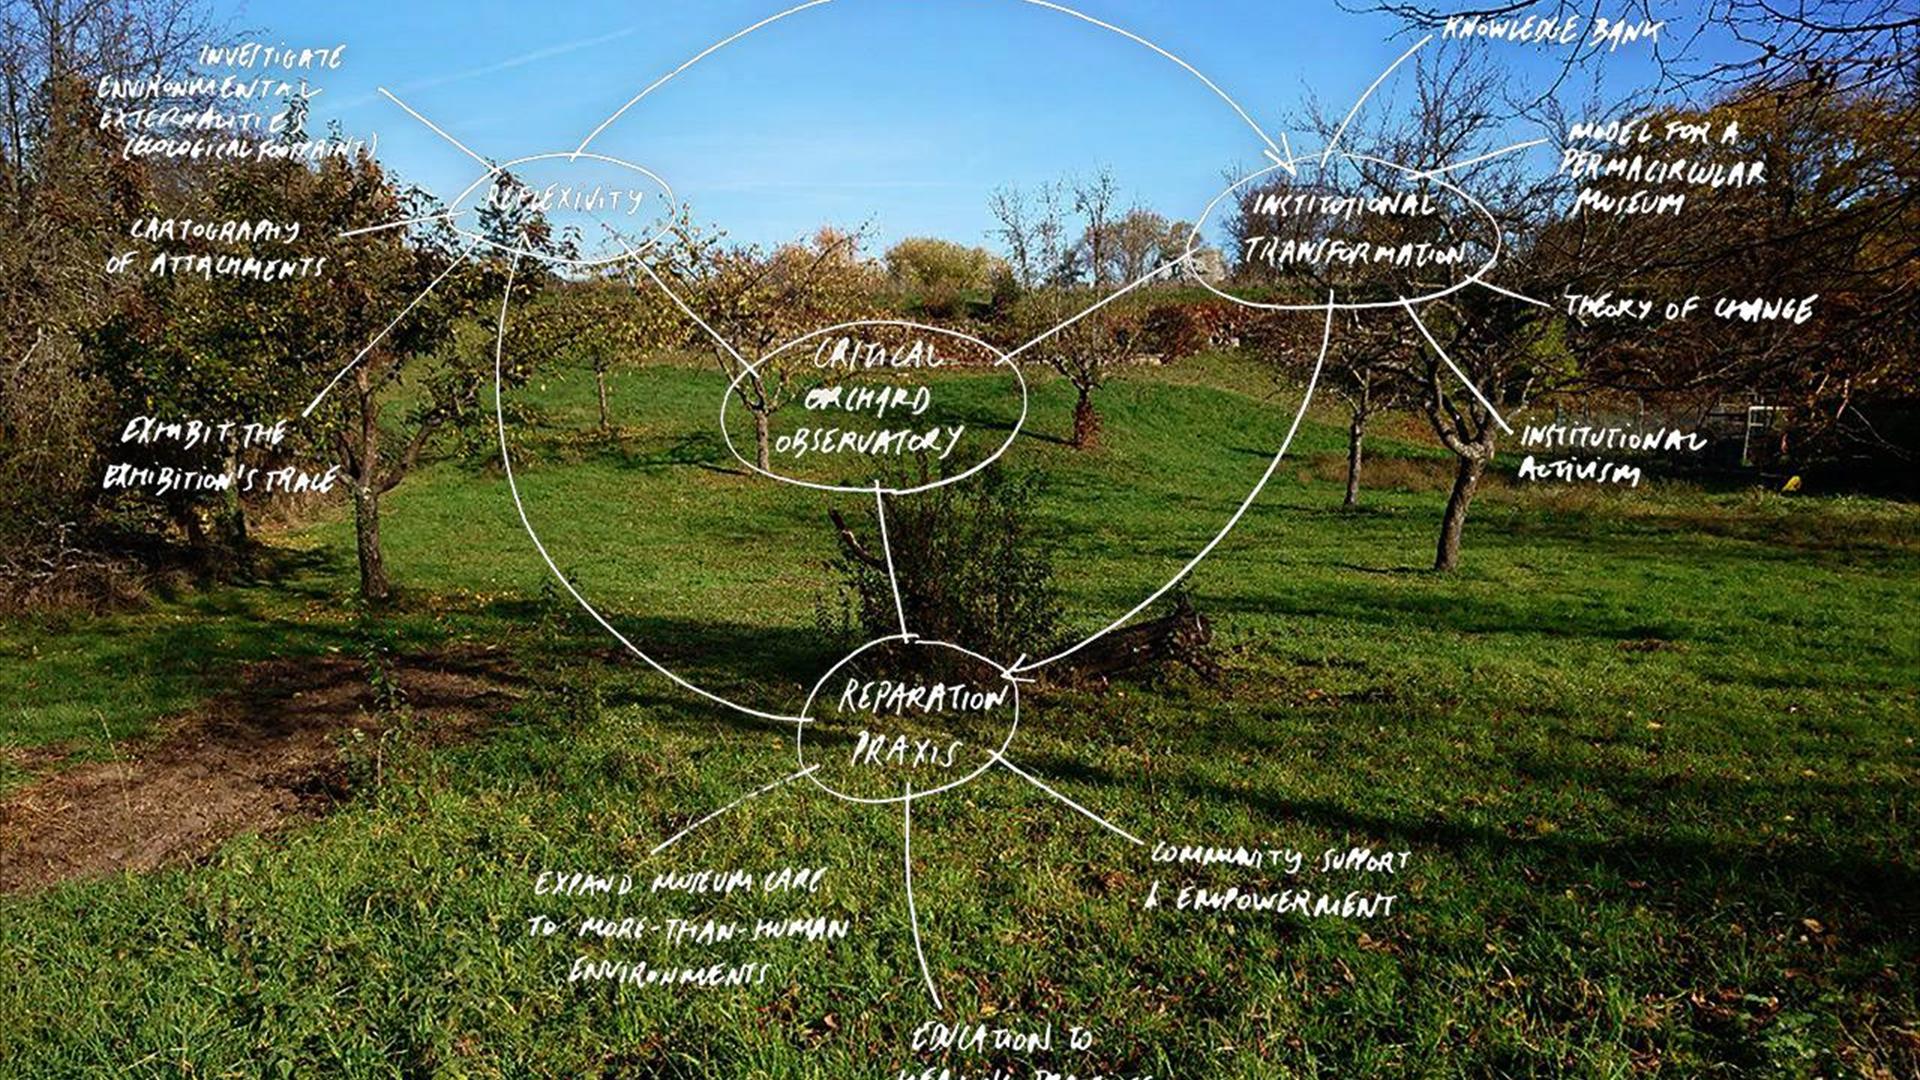 An image showing a mapping exercise. The background is a green space.